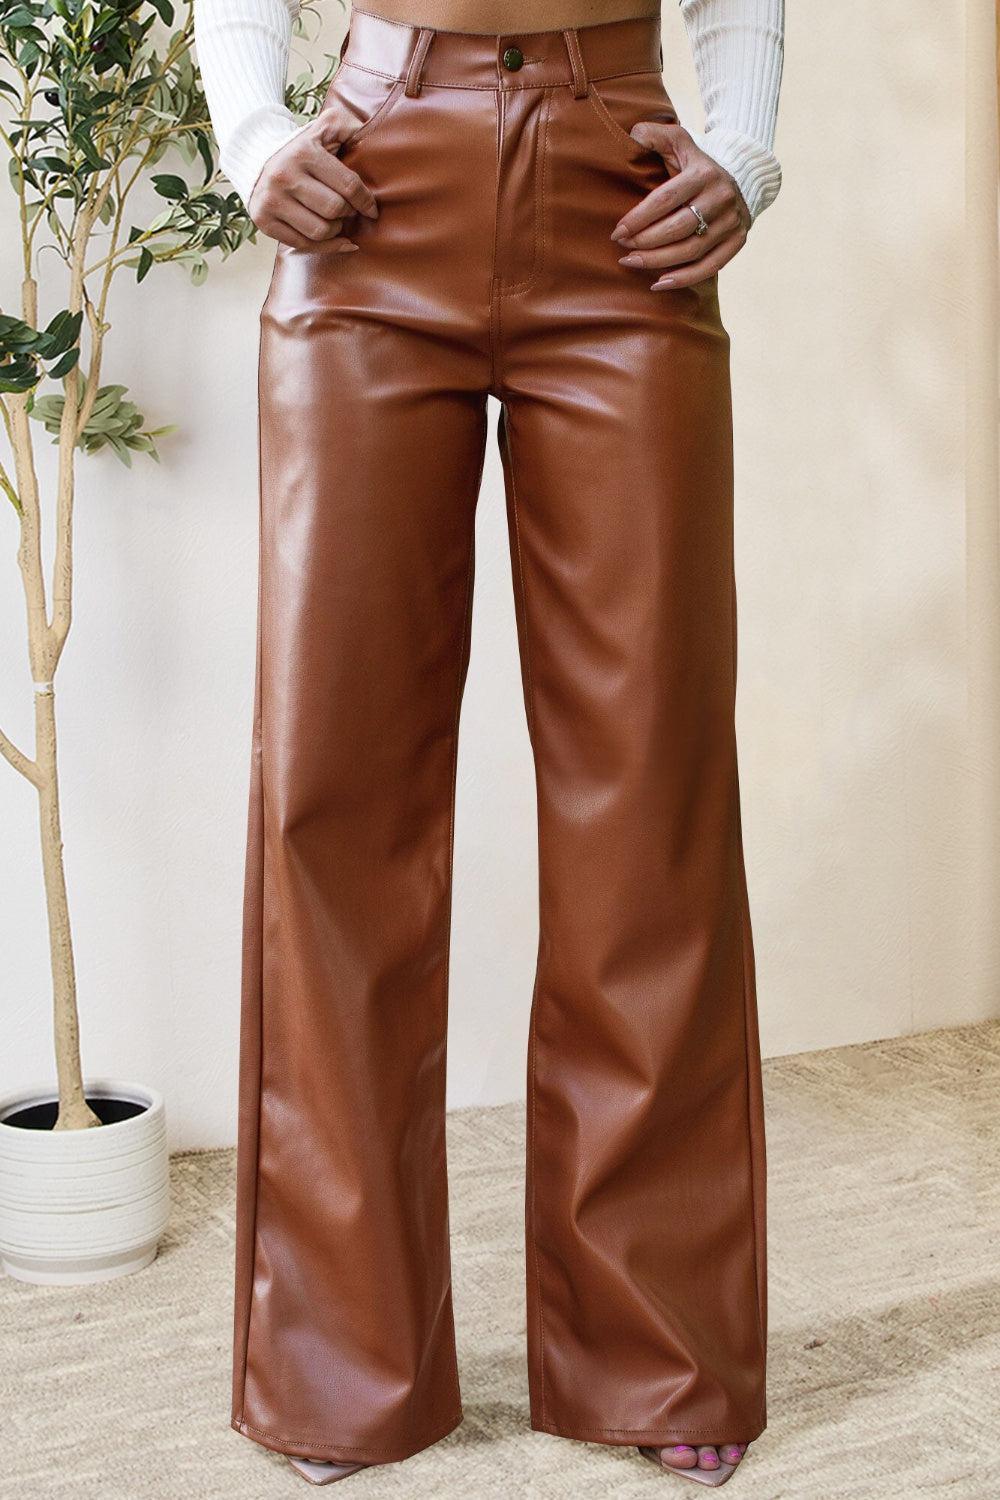 a woman wearing brown leather pants and a white shirt